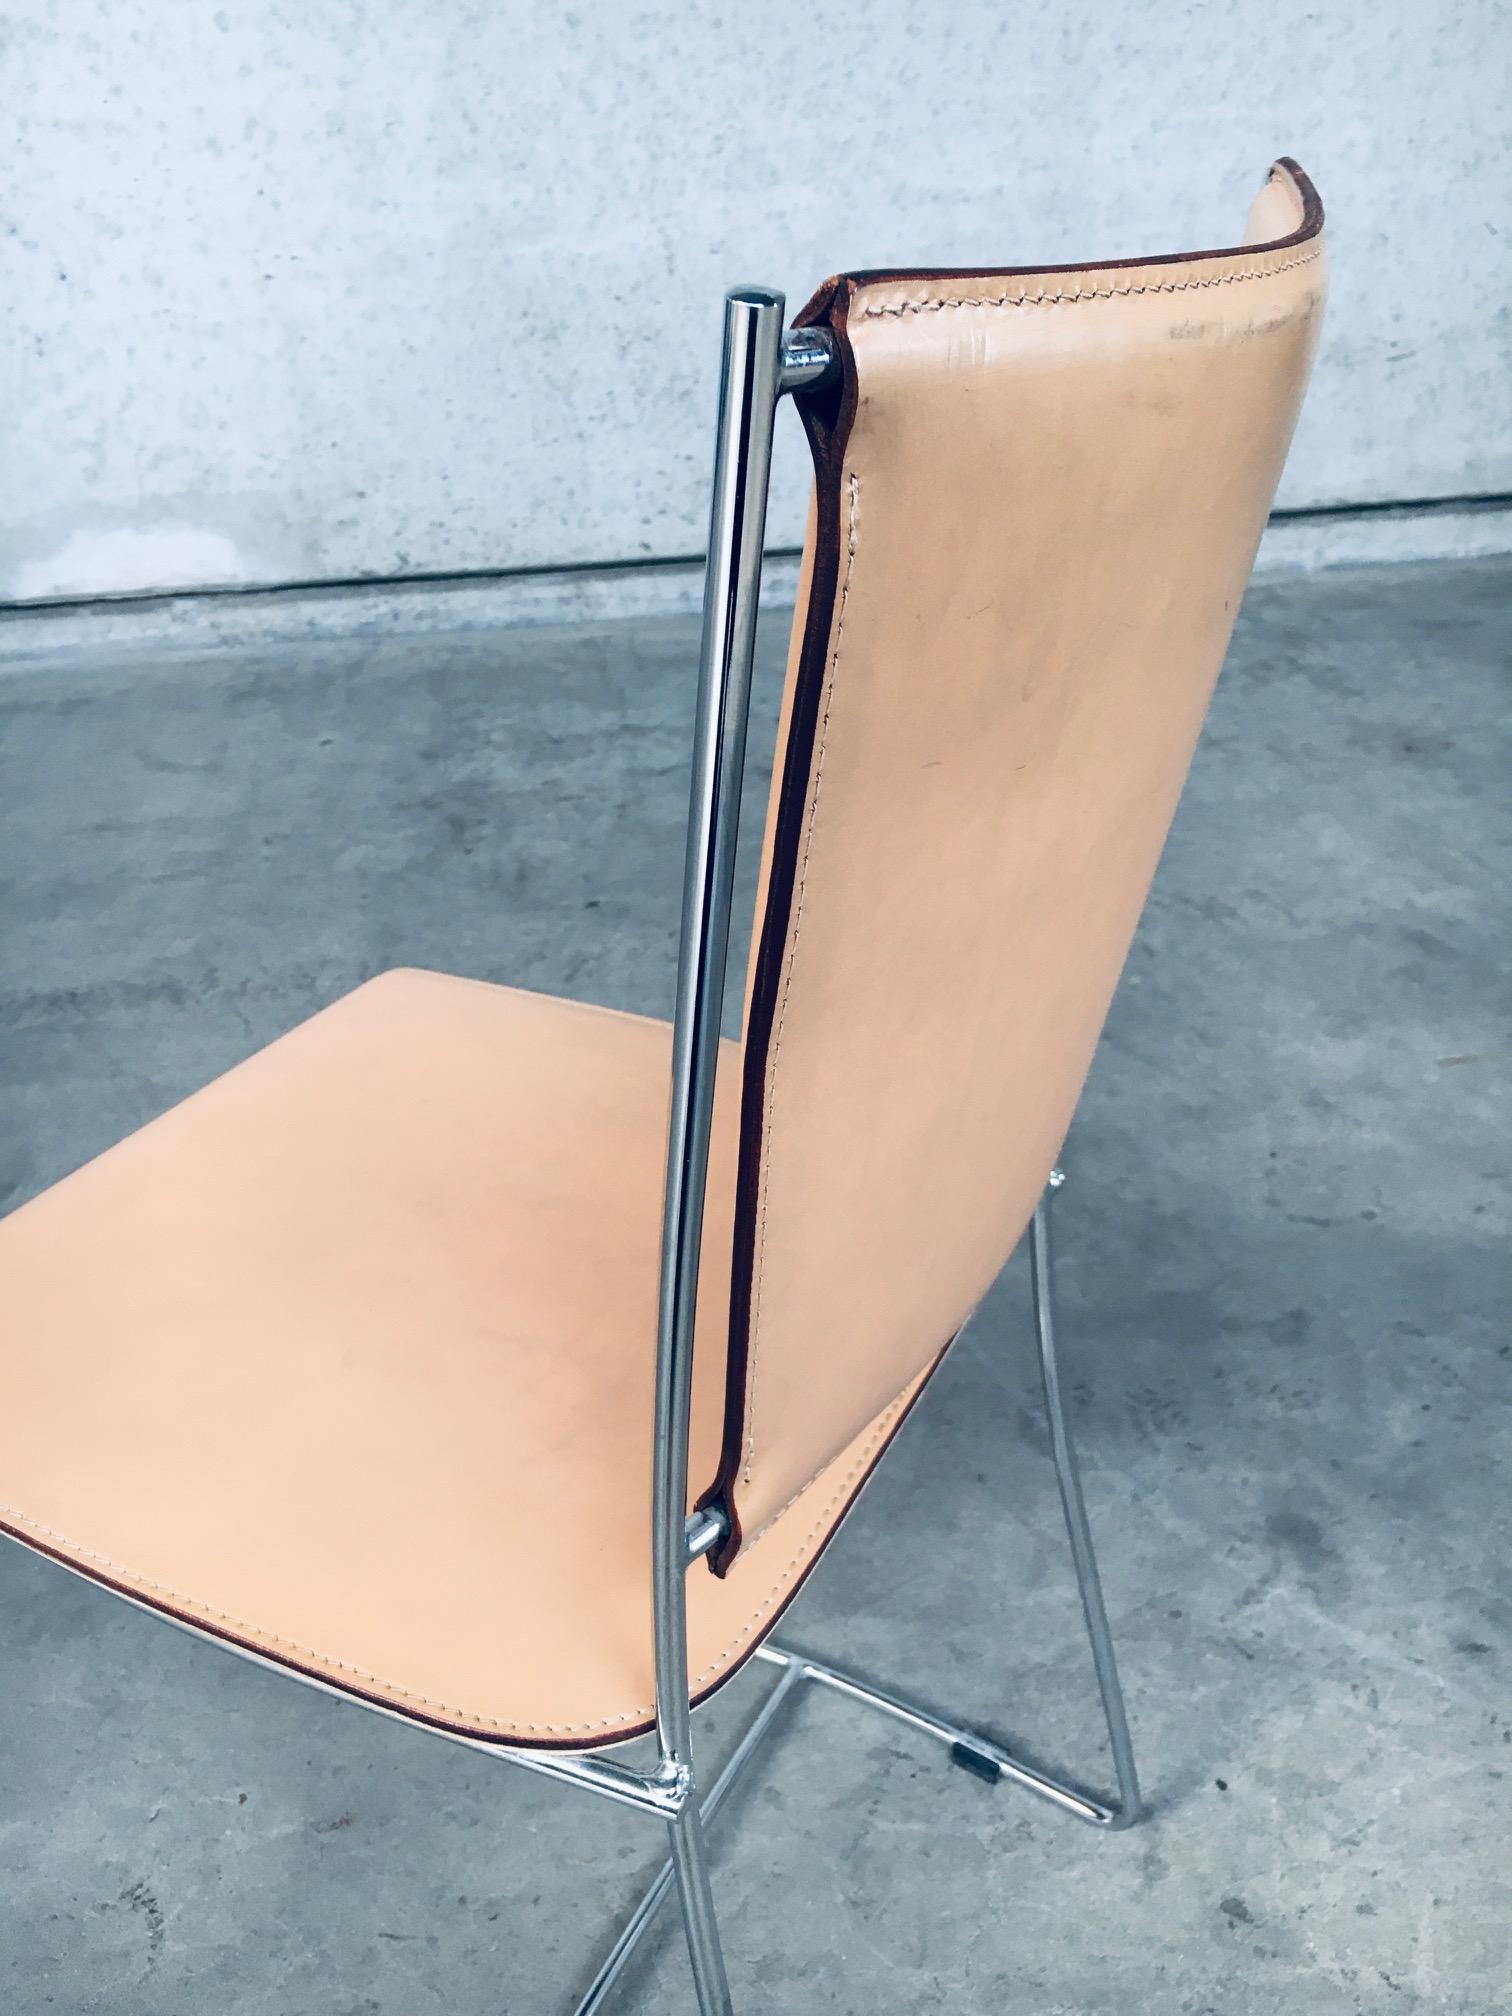 Postmodern Italian Design Leather Dining Chair set by Segis, Italy 1990's For Sale 4